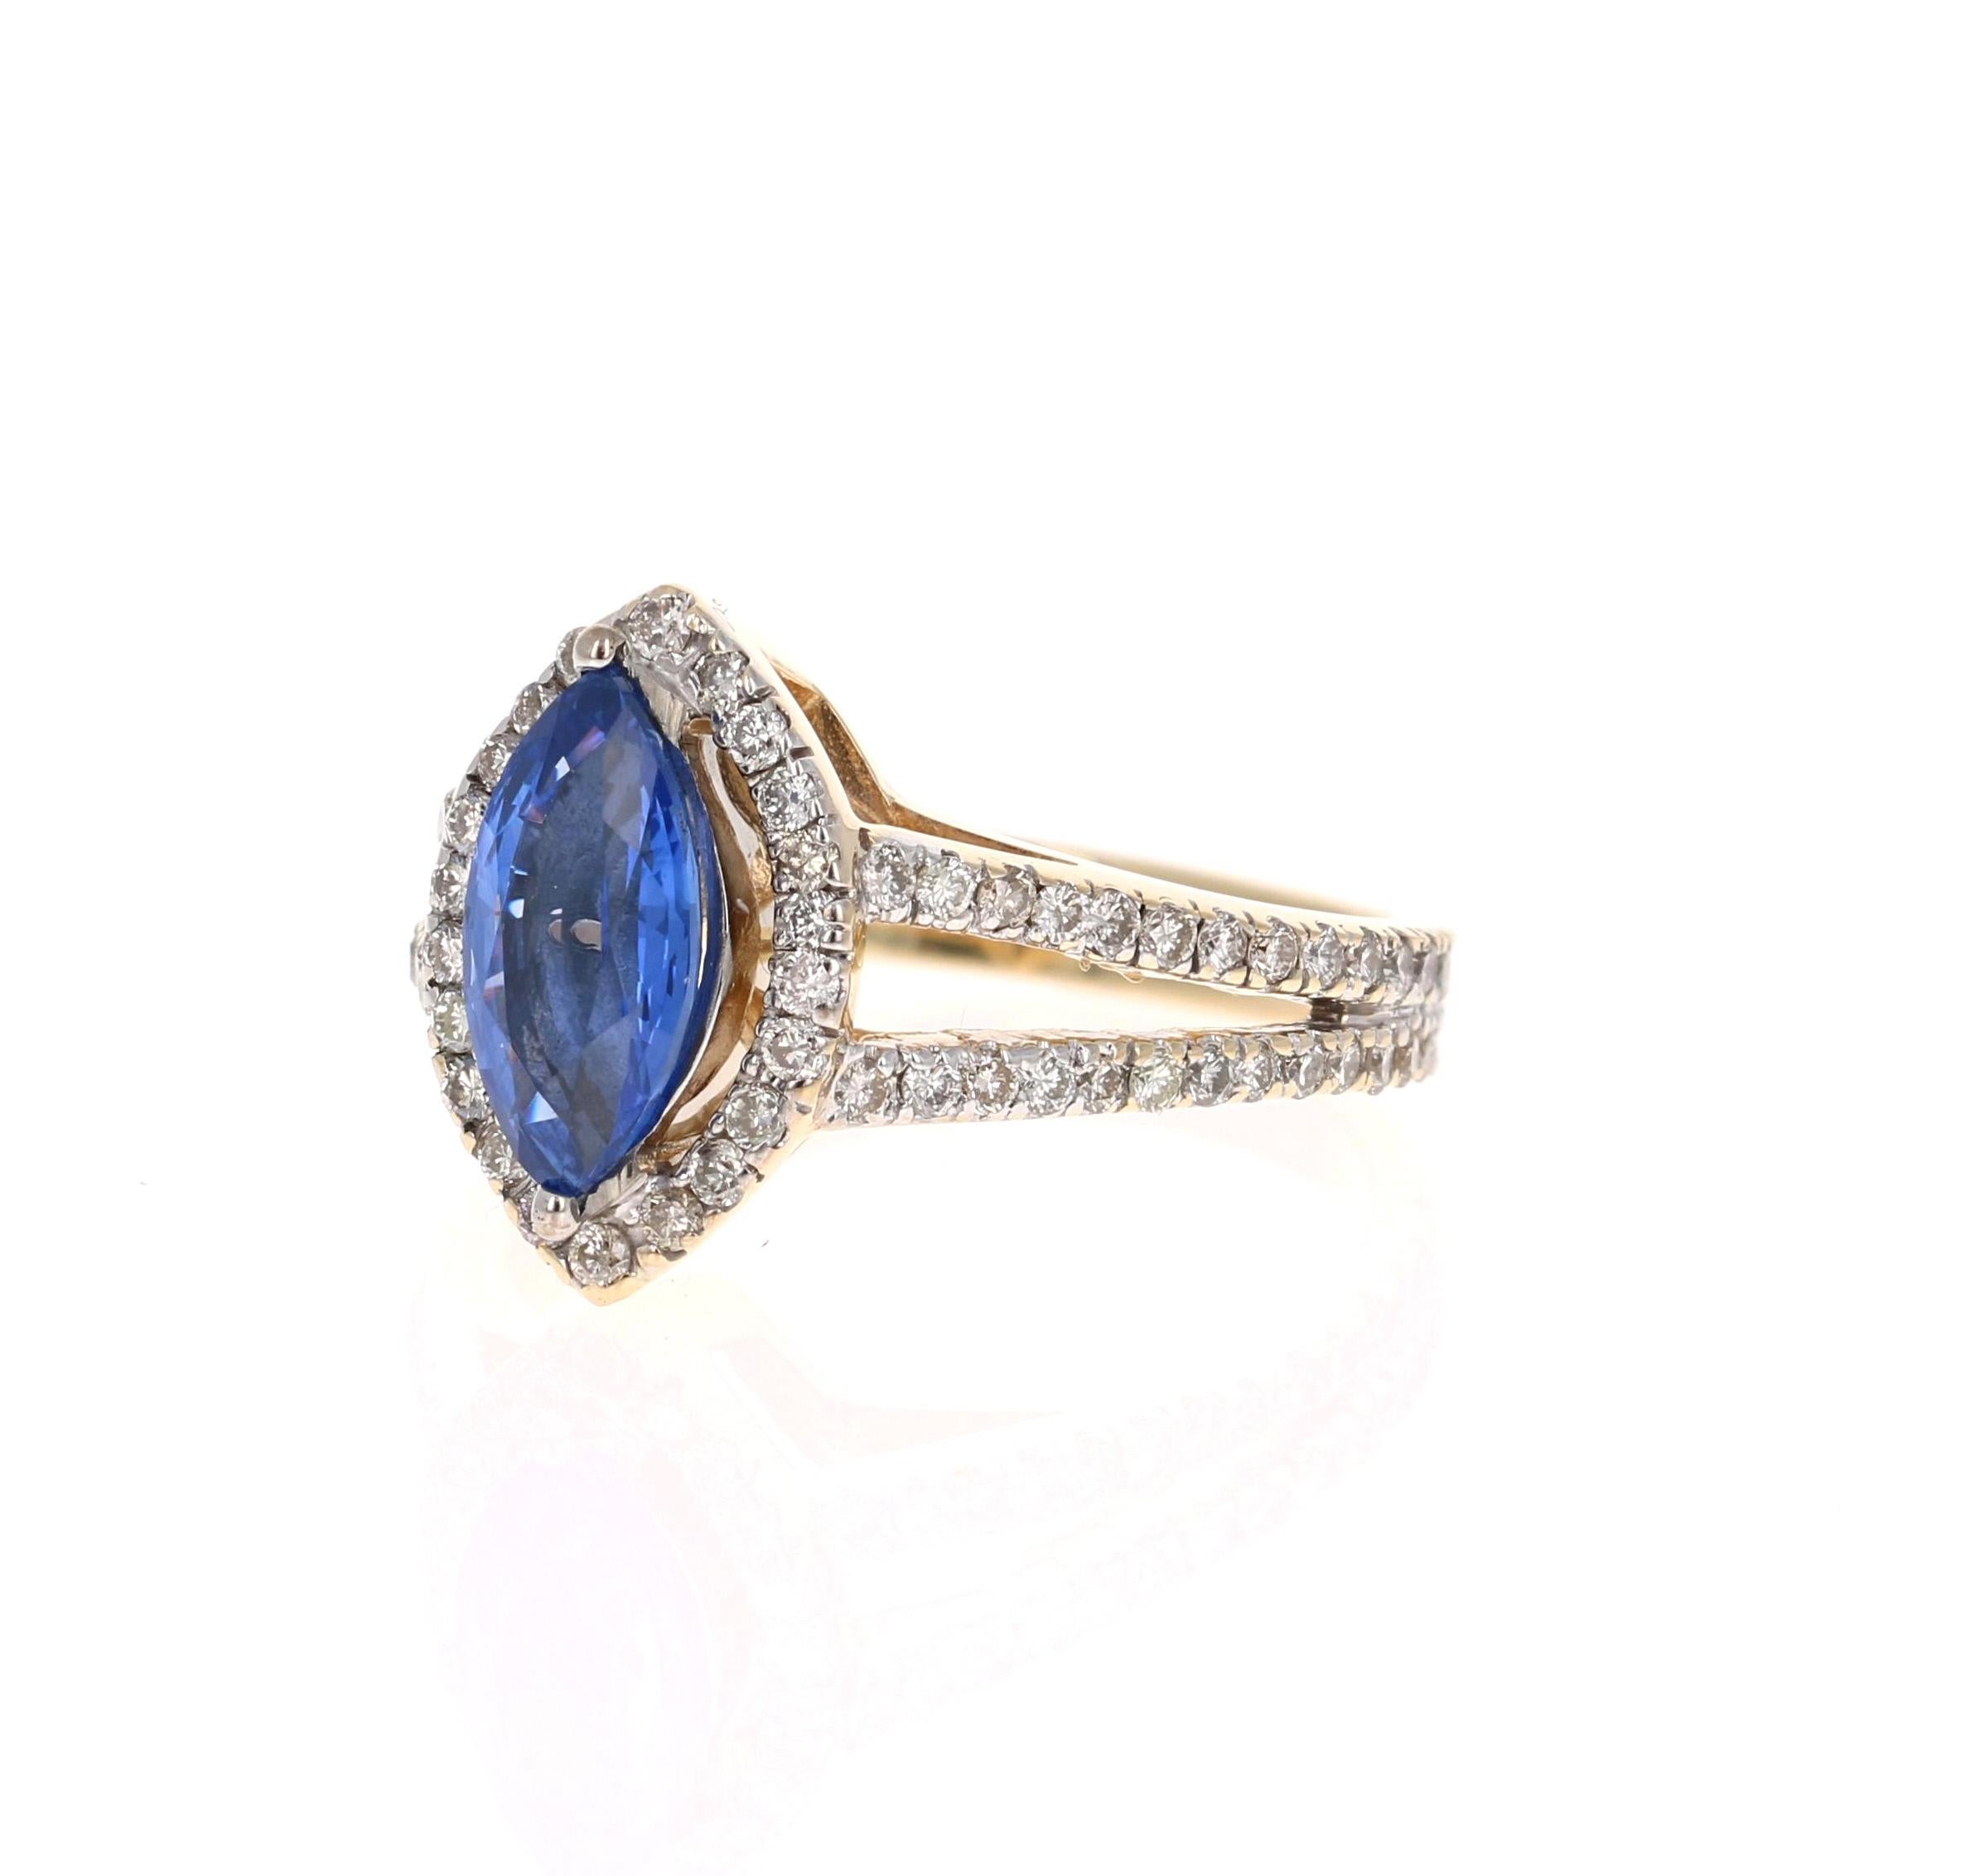 This beautiful ring has a vivid 1.67 Carat Marquise Cut Tanzanite. The Tanzanite is surrounded by 78 Round Cut Diamonds that weigh 0.73 carats. (Clarity: VS, Color: H) The total carat weight of the ring is 2.40 carats. 

The ring is made in 14K